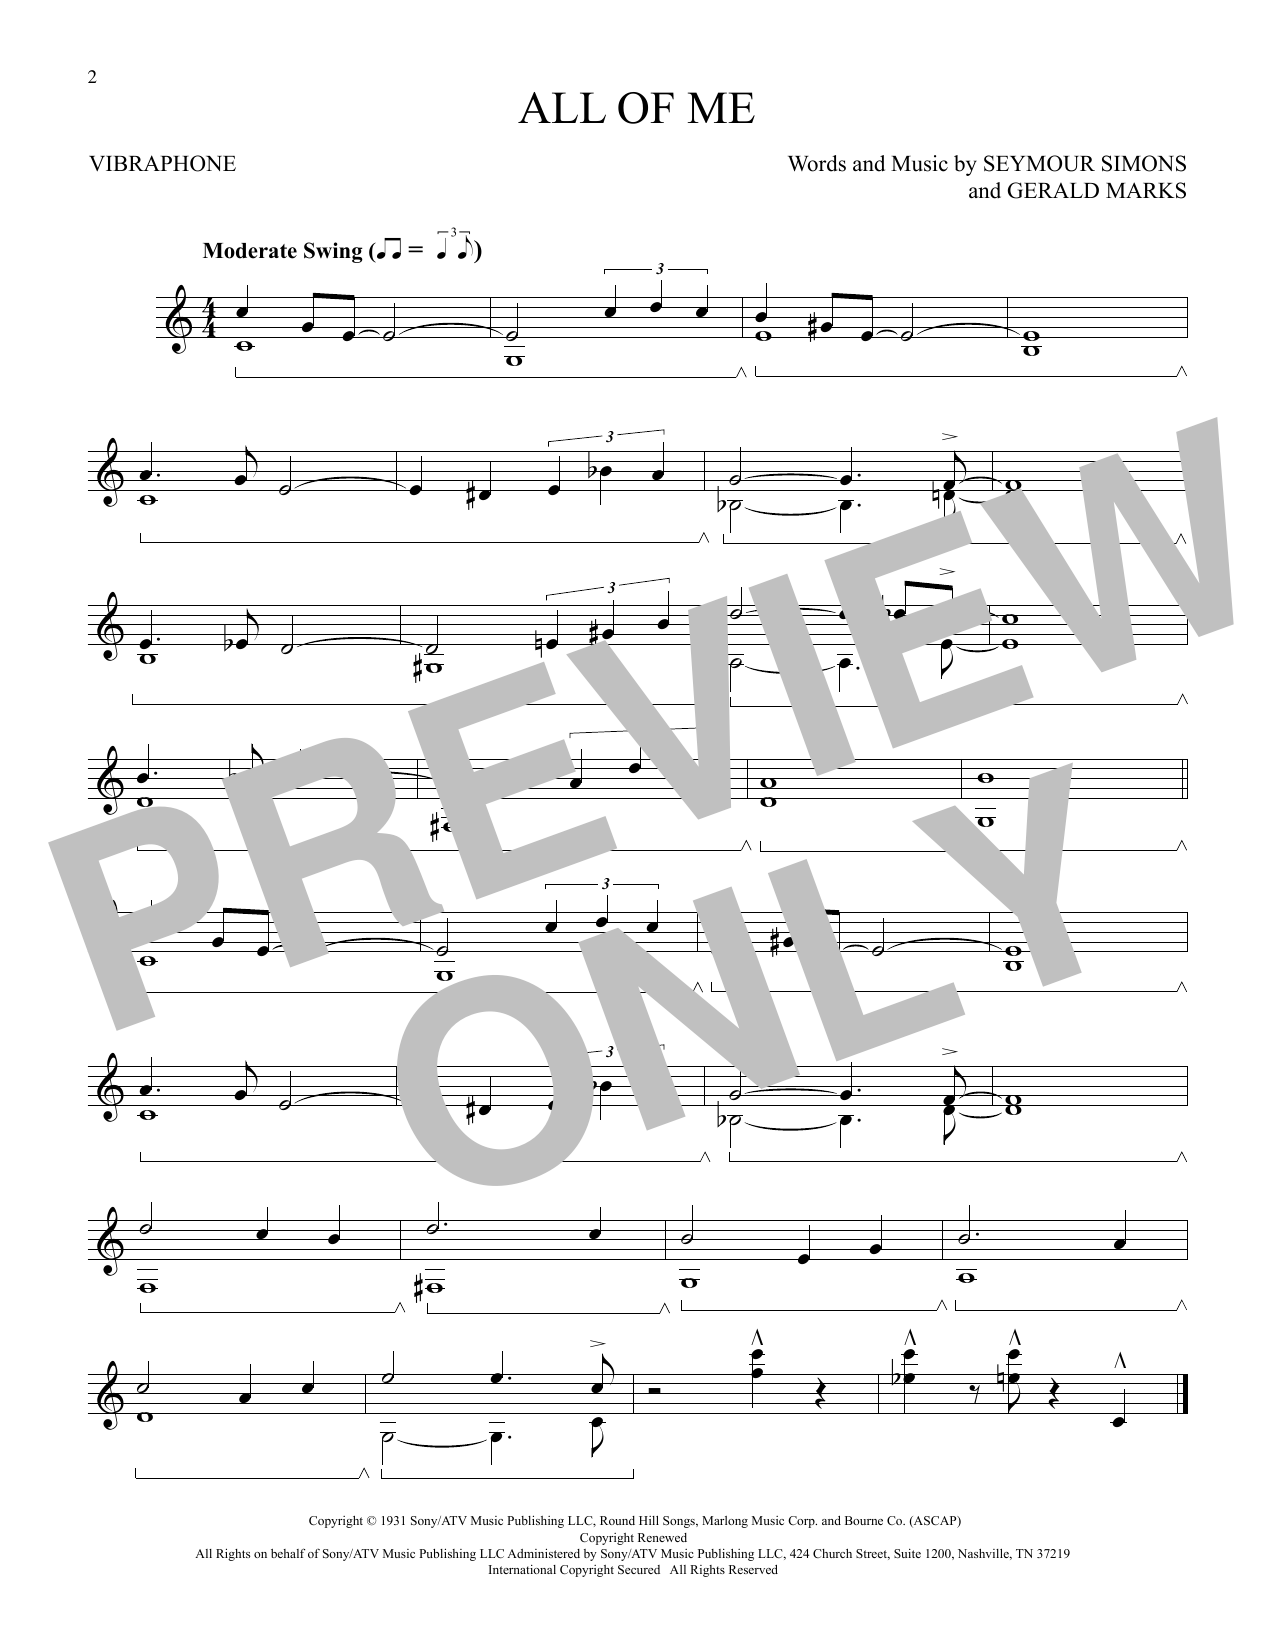 Seymour Simons and Gerald Marks All Of Me sheet music notes printable PDF score